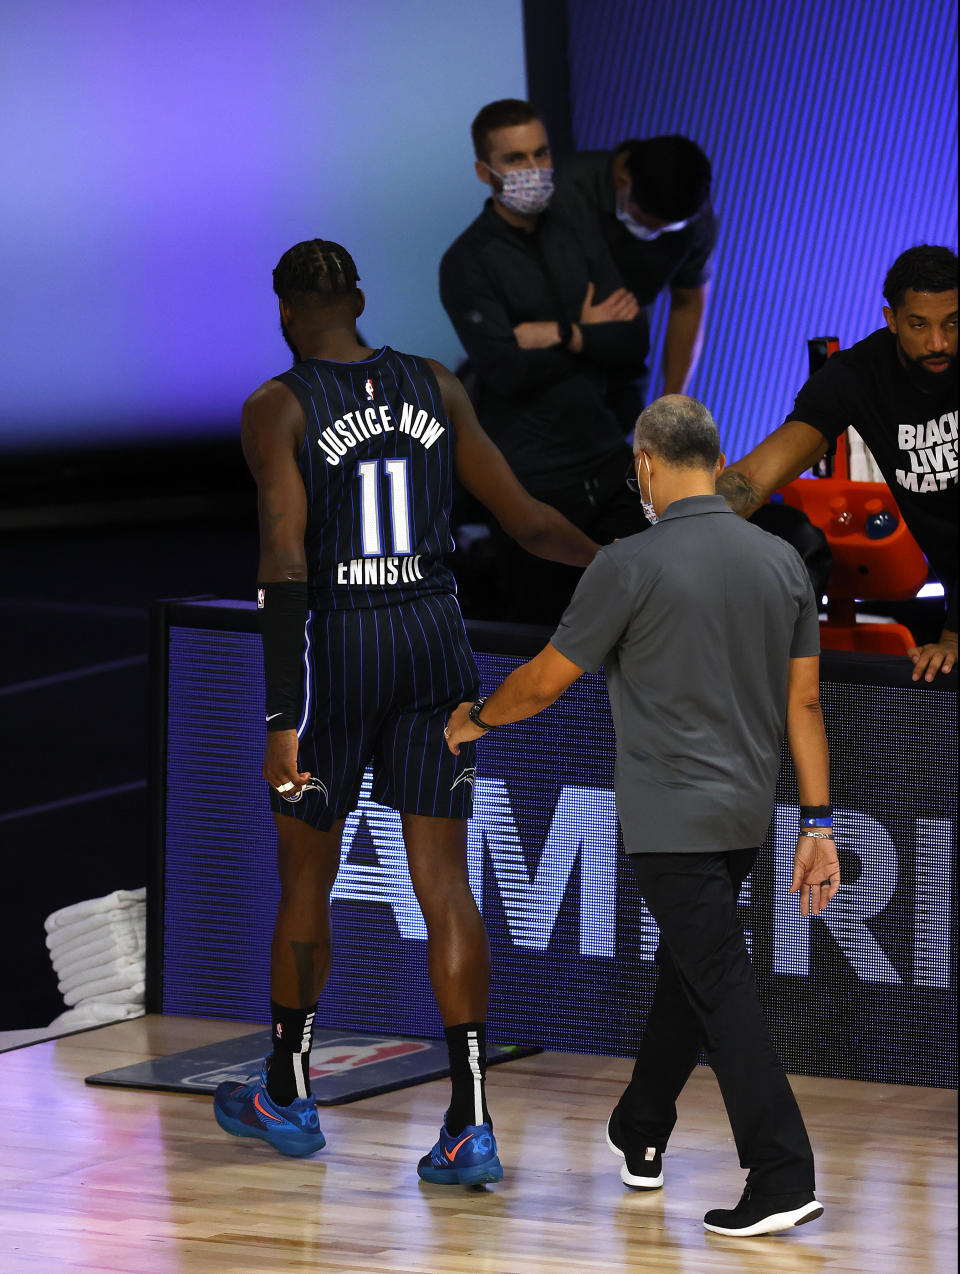 Orlando Magic's James Ennis III leaves the court after being ejected along with Milwaukee Bucks' Marvin Williams during Game 3 of an NBA basketball first-round playoff series, Saturday, Aug. 22, 2020, in Lake Buena Vista, Fla. (Mike Ehrmann/Pool Photo via AP)